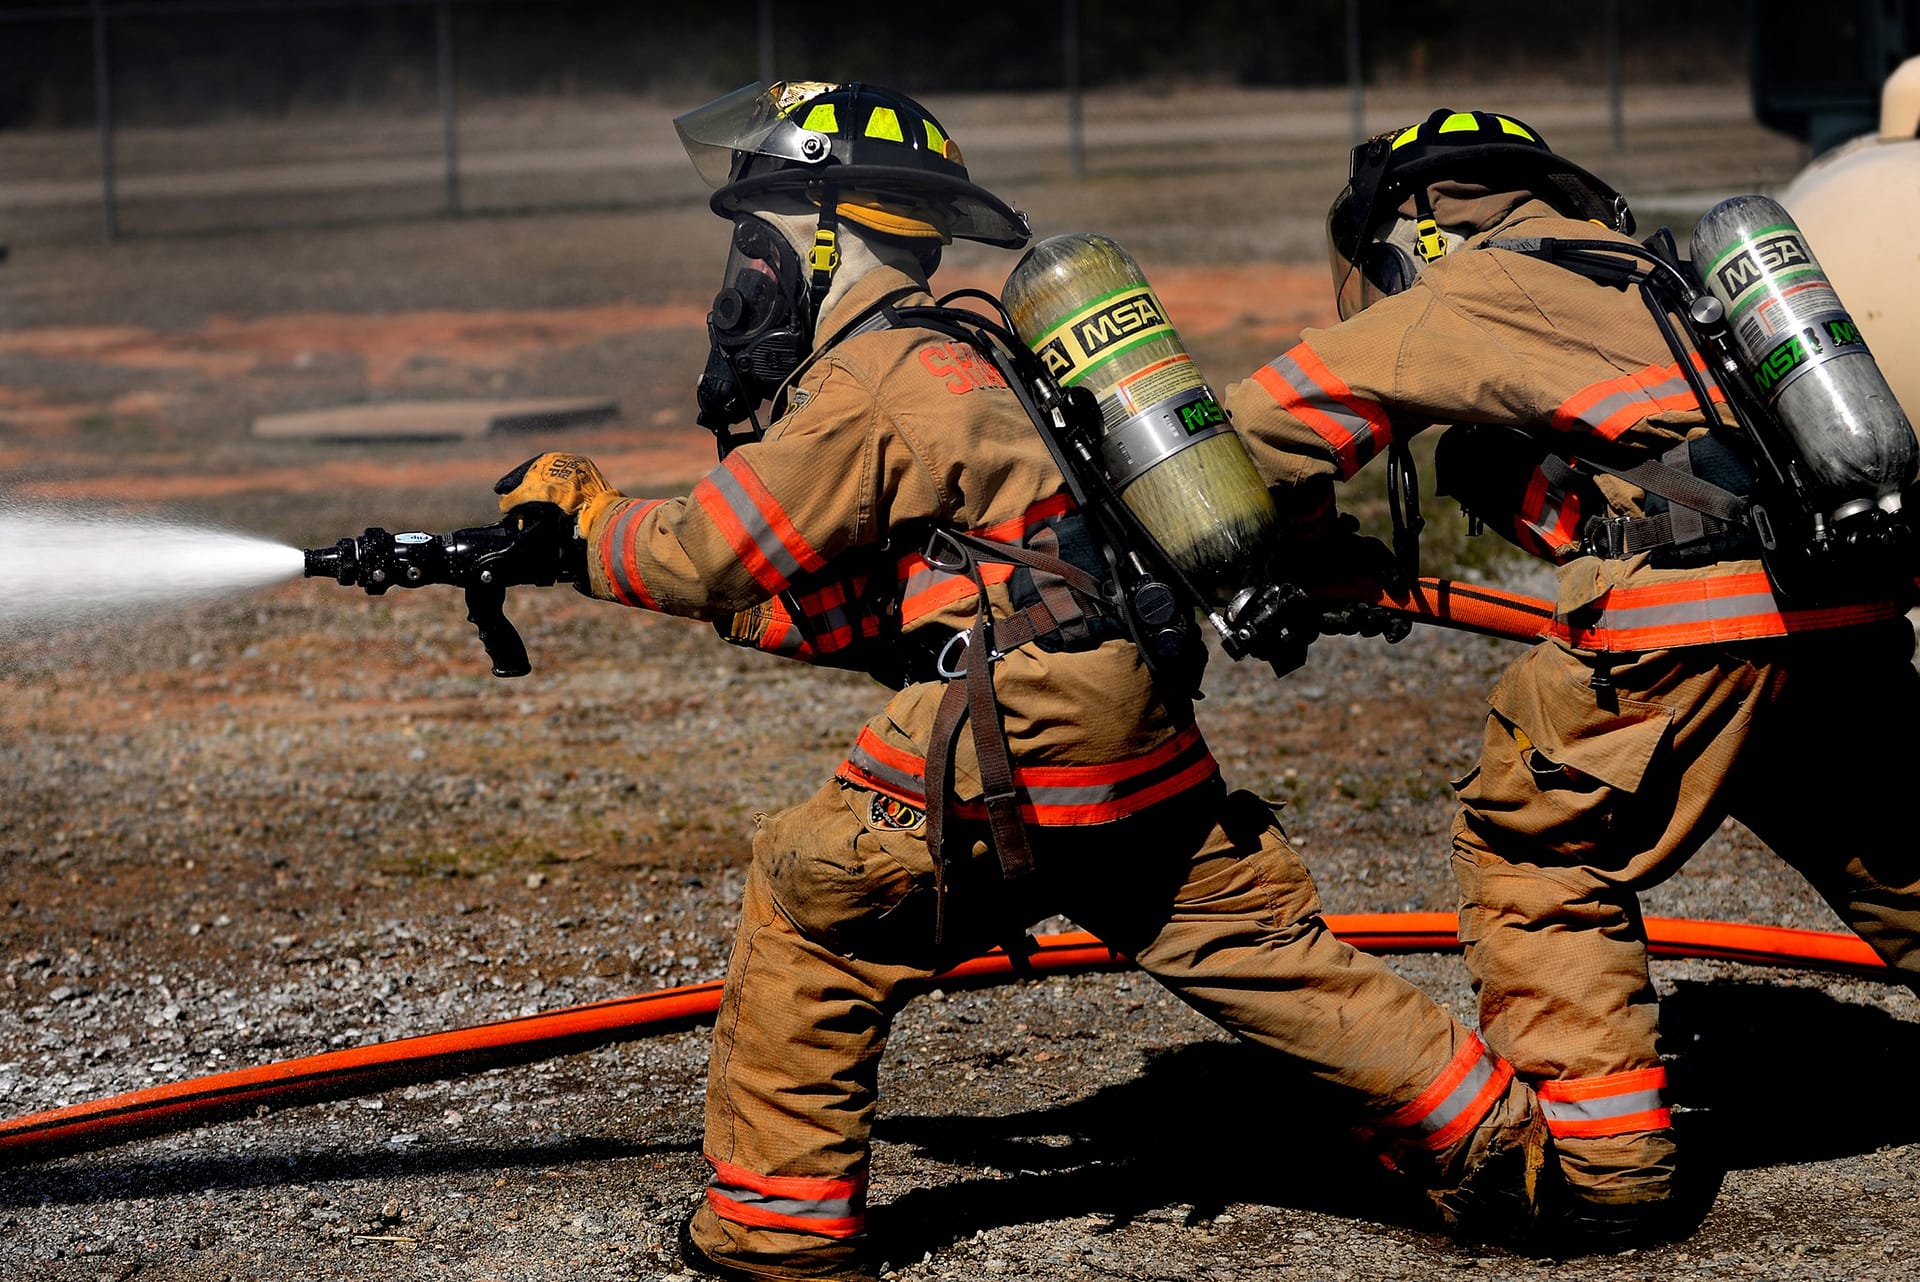 Master Class Series for Firefighters